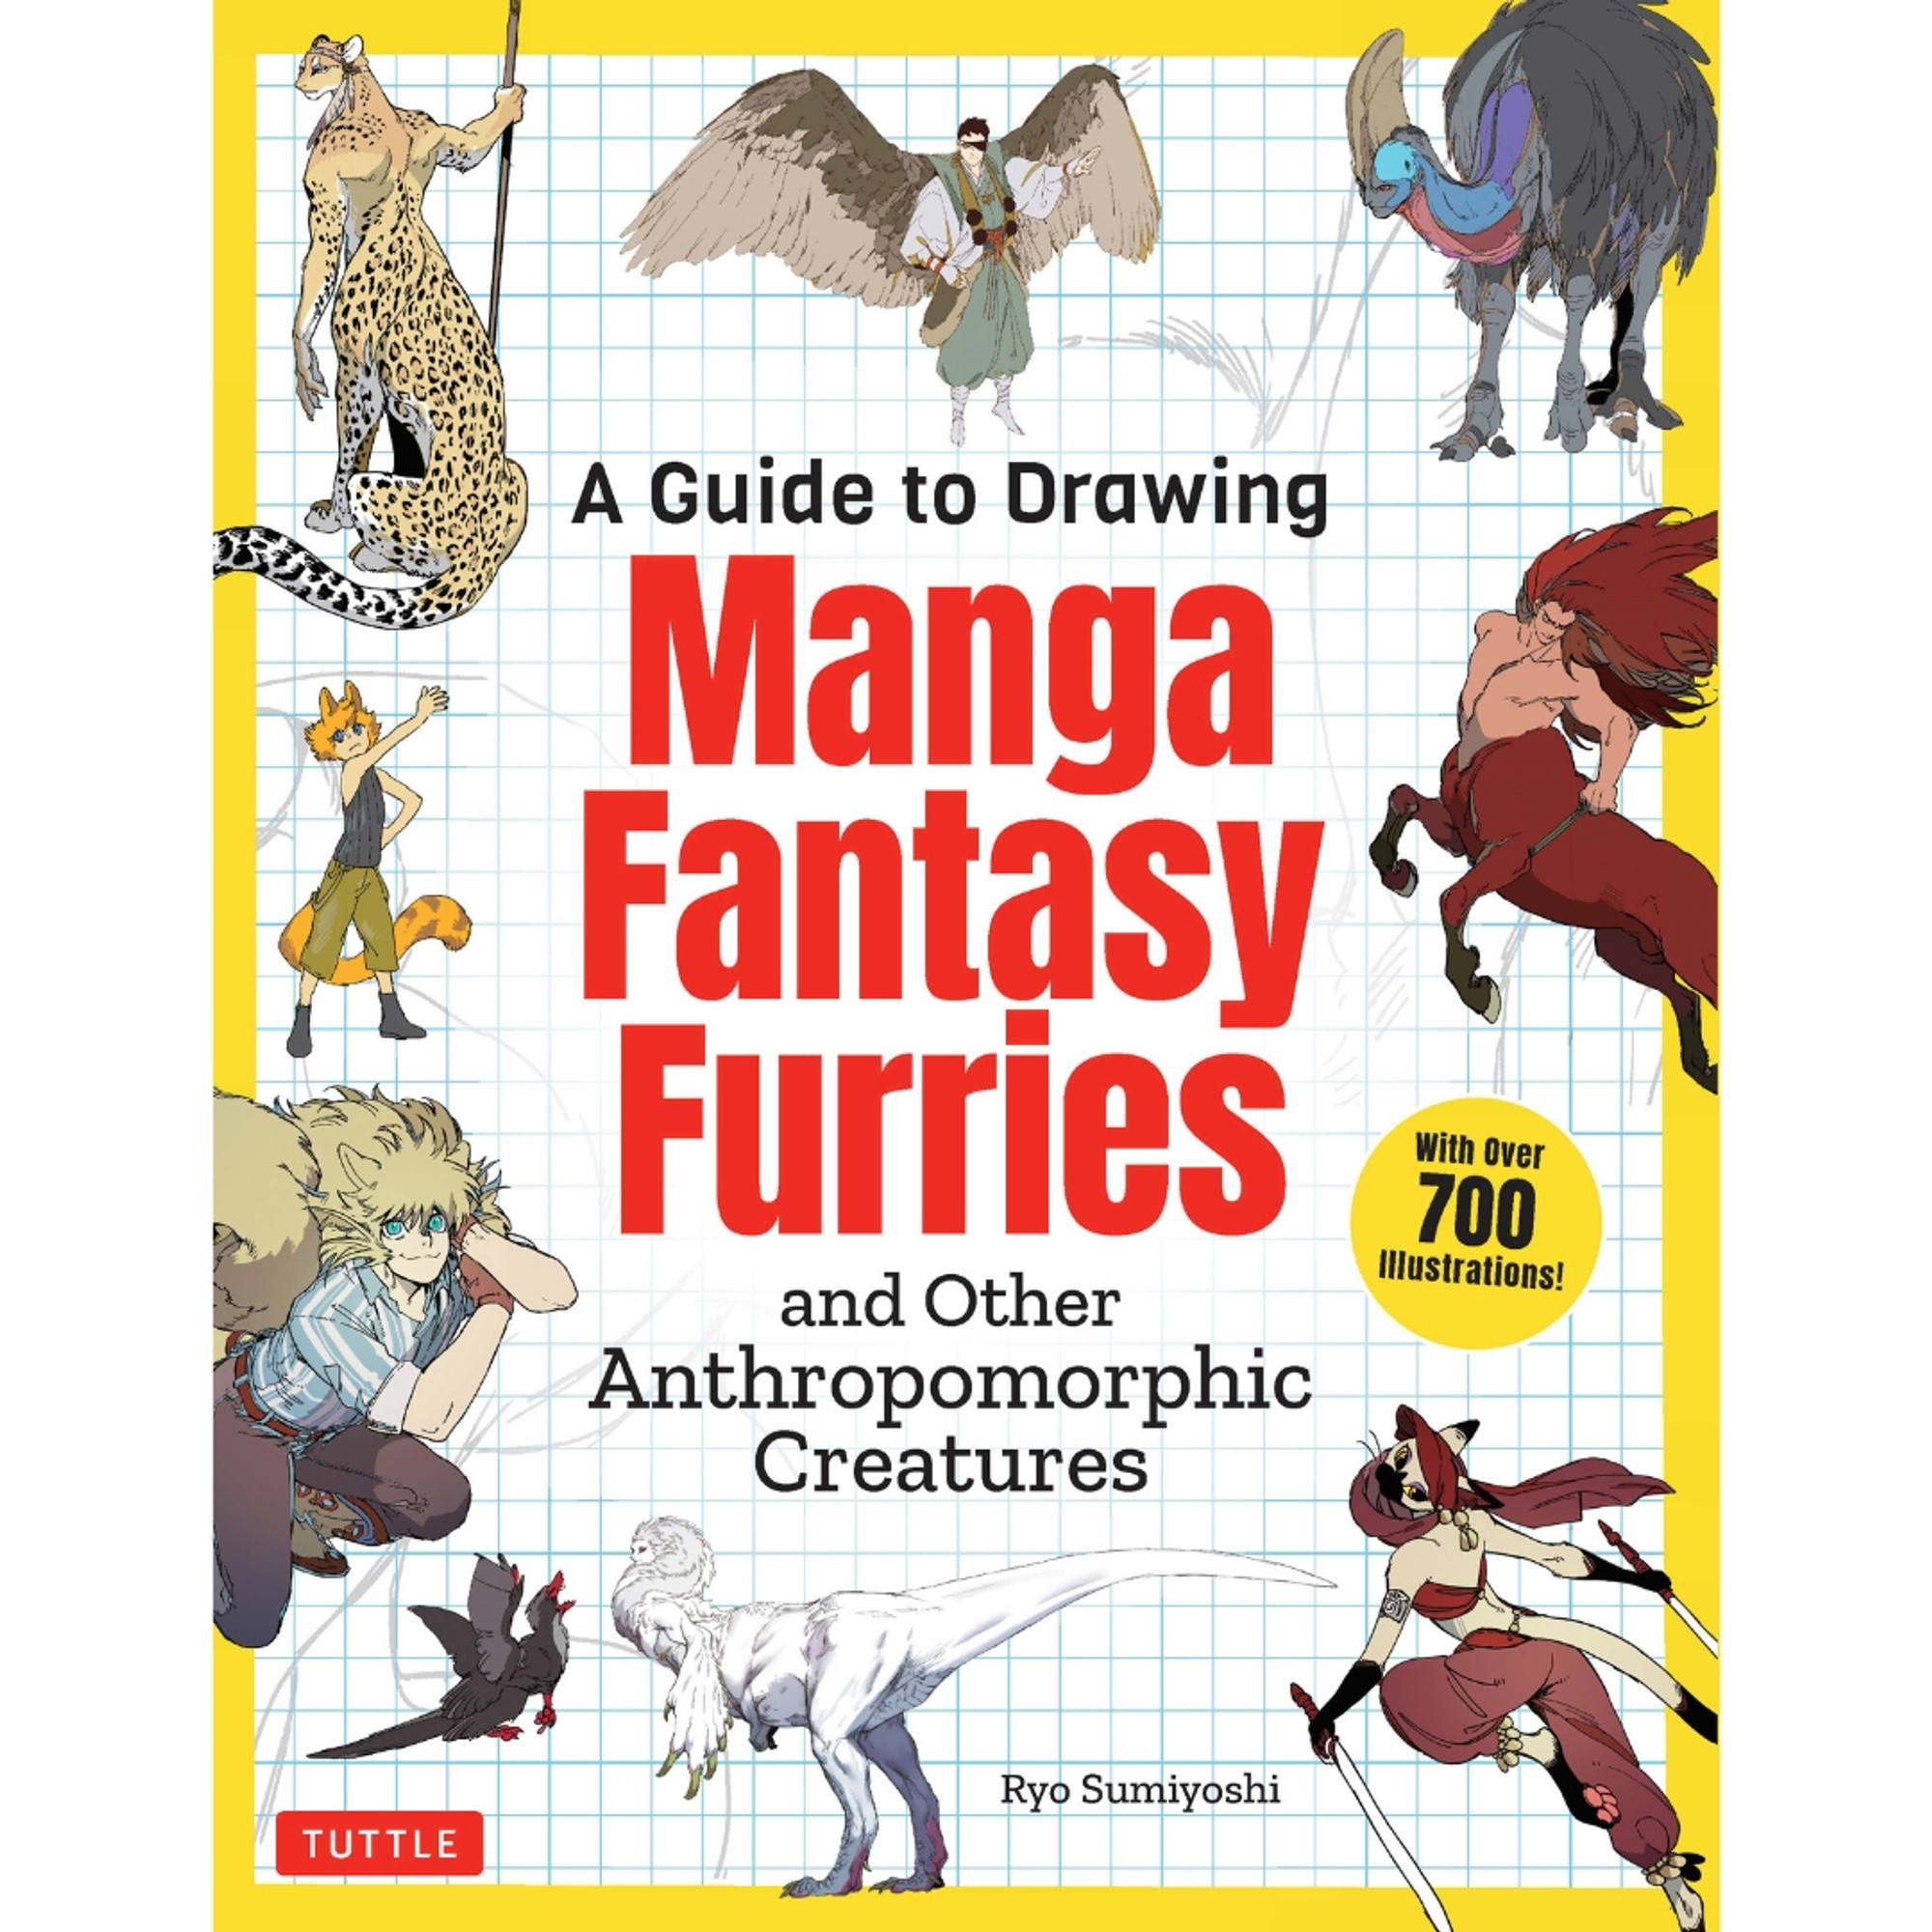 A Guide to Drawing Manga Fantasy Furries (9784805317341) Tuttle